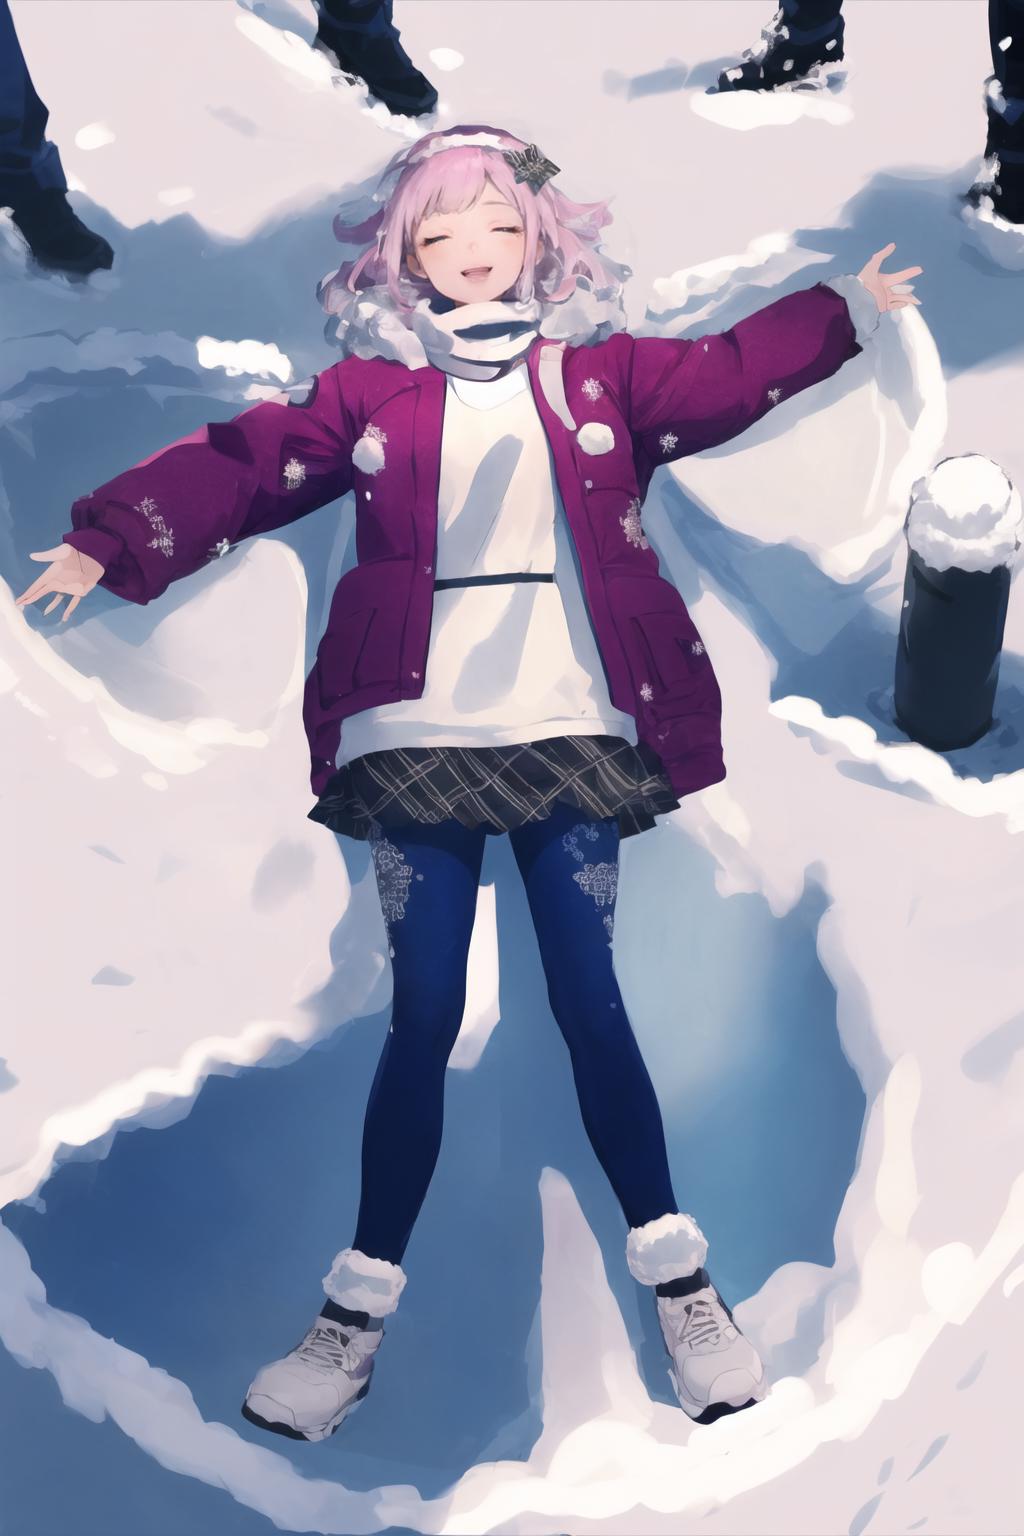 On the snow is a child in the pose of the angel. Hands spread out in